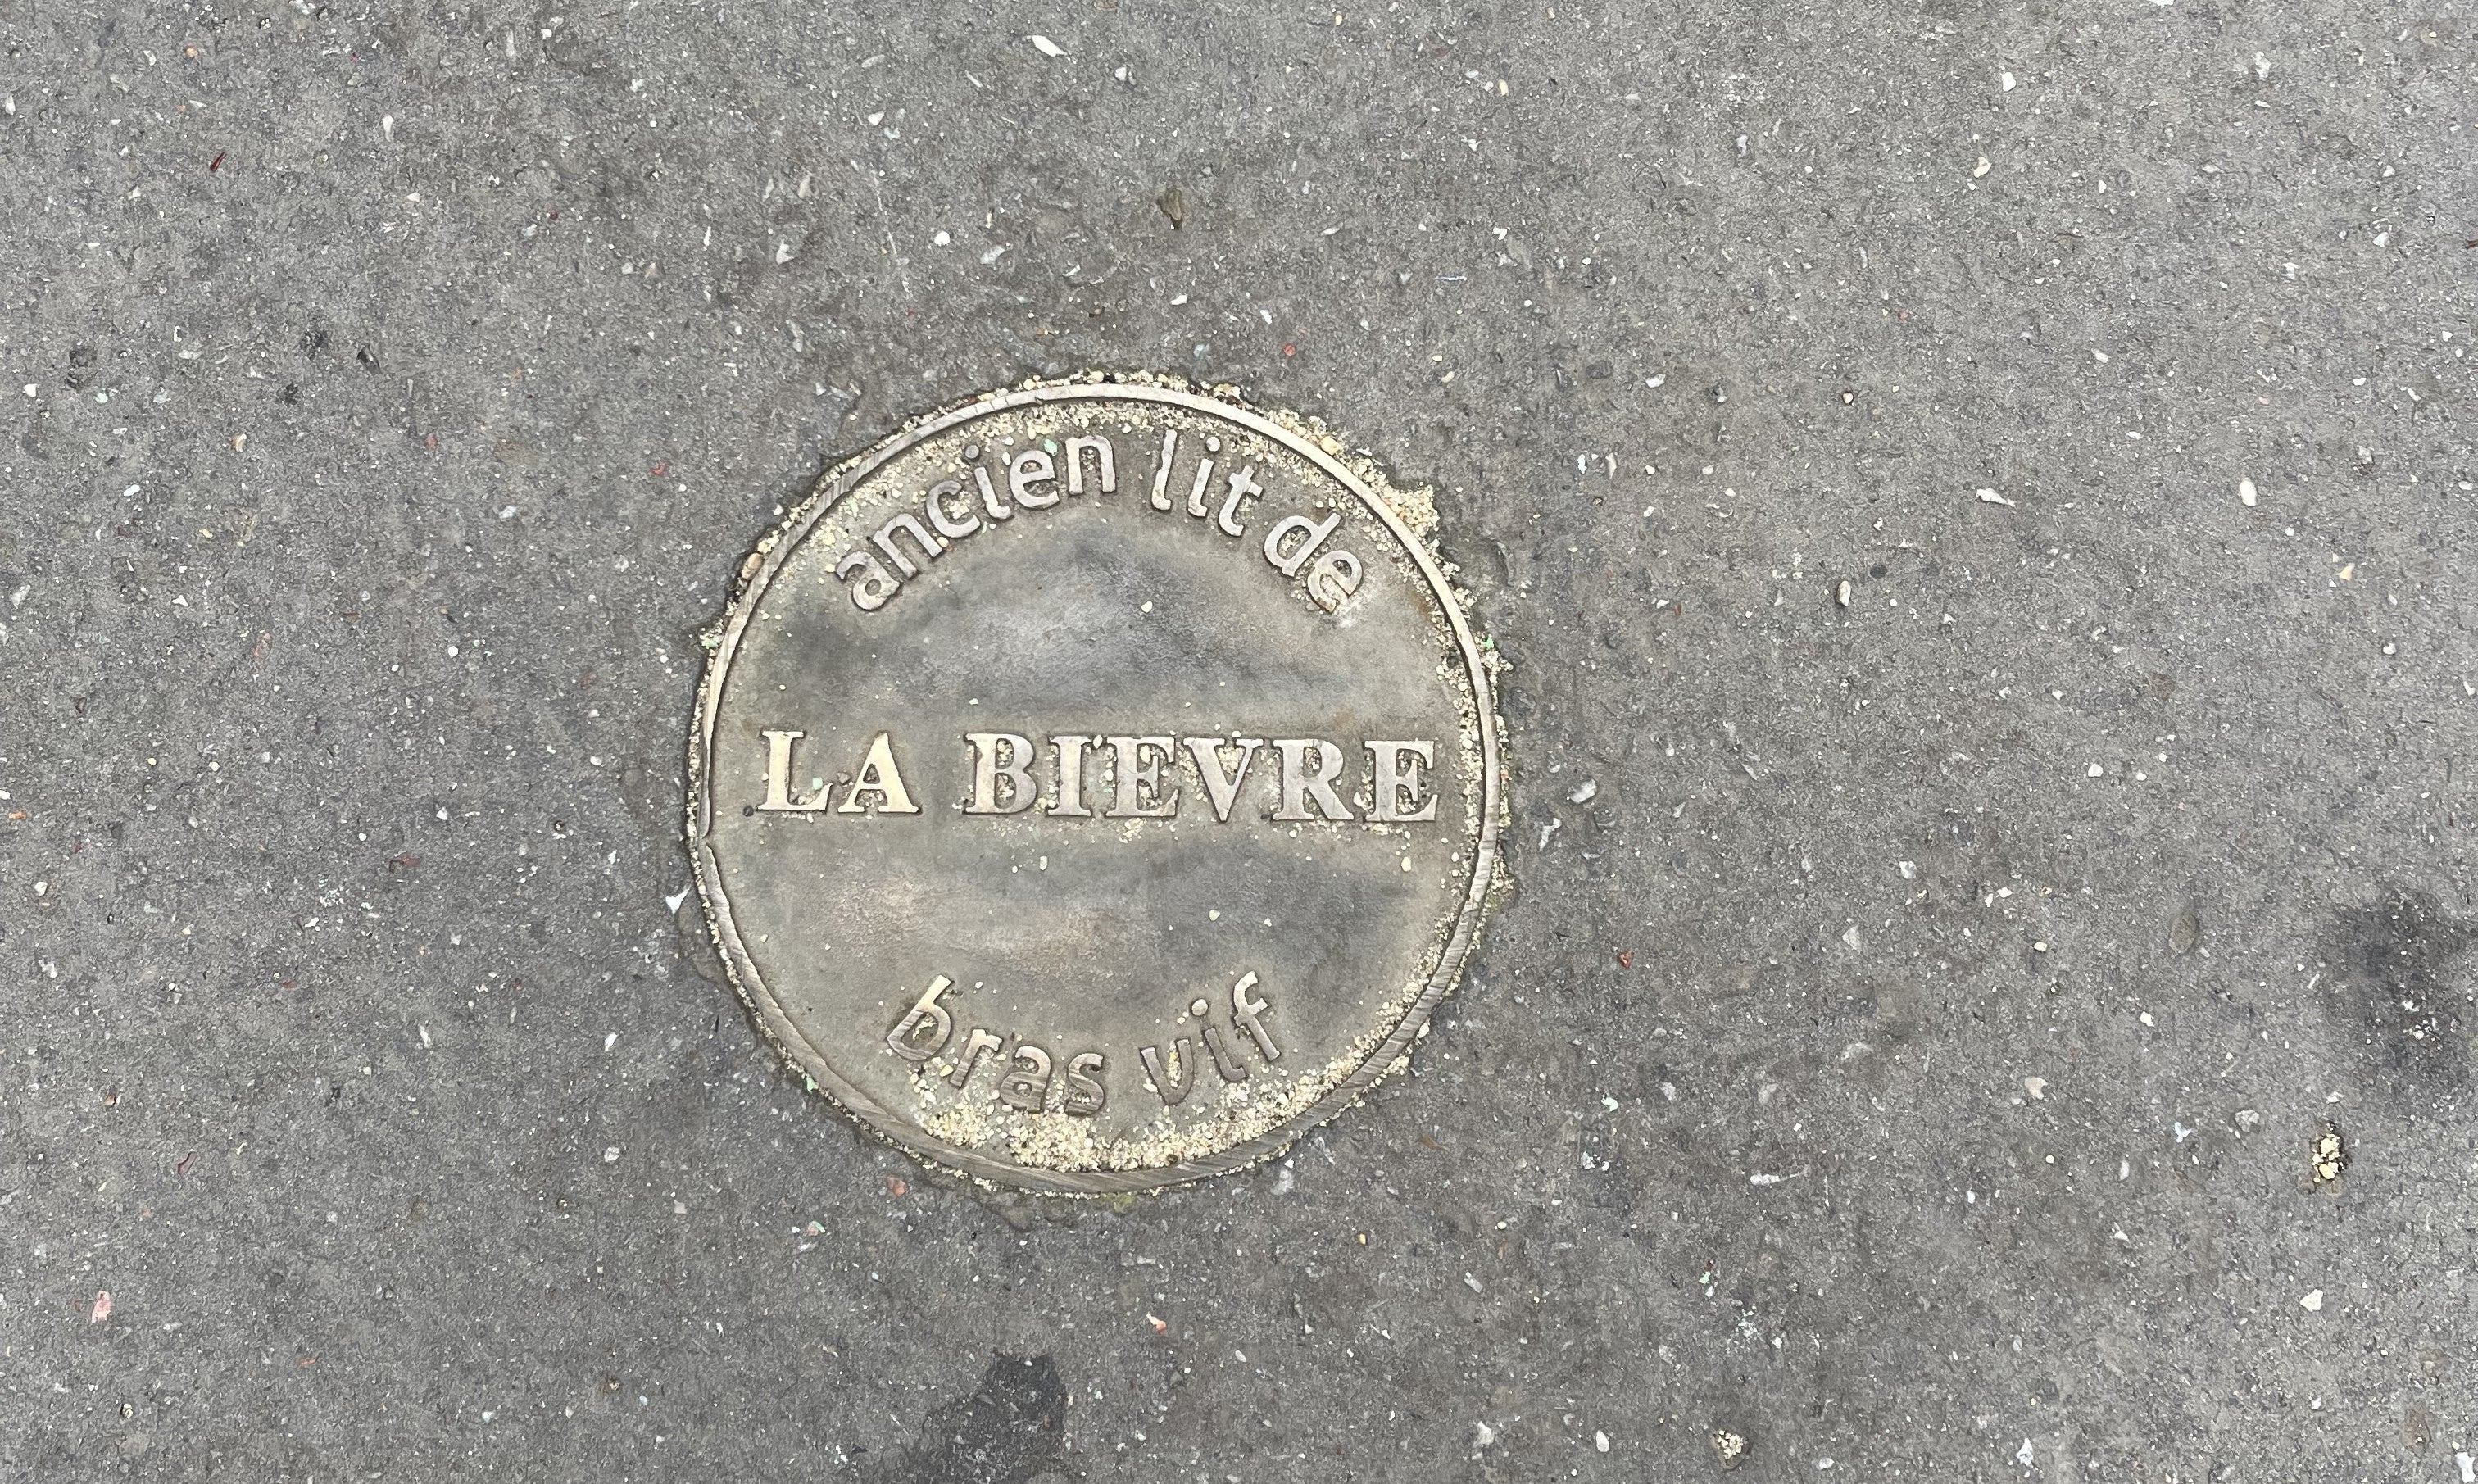 A plaque indicating the underground flow of the Bièvre